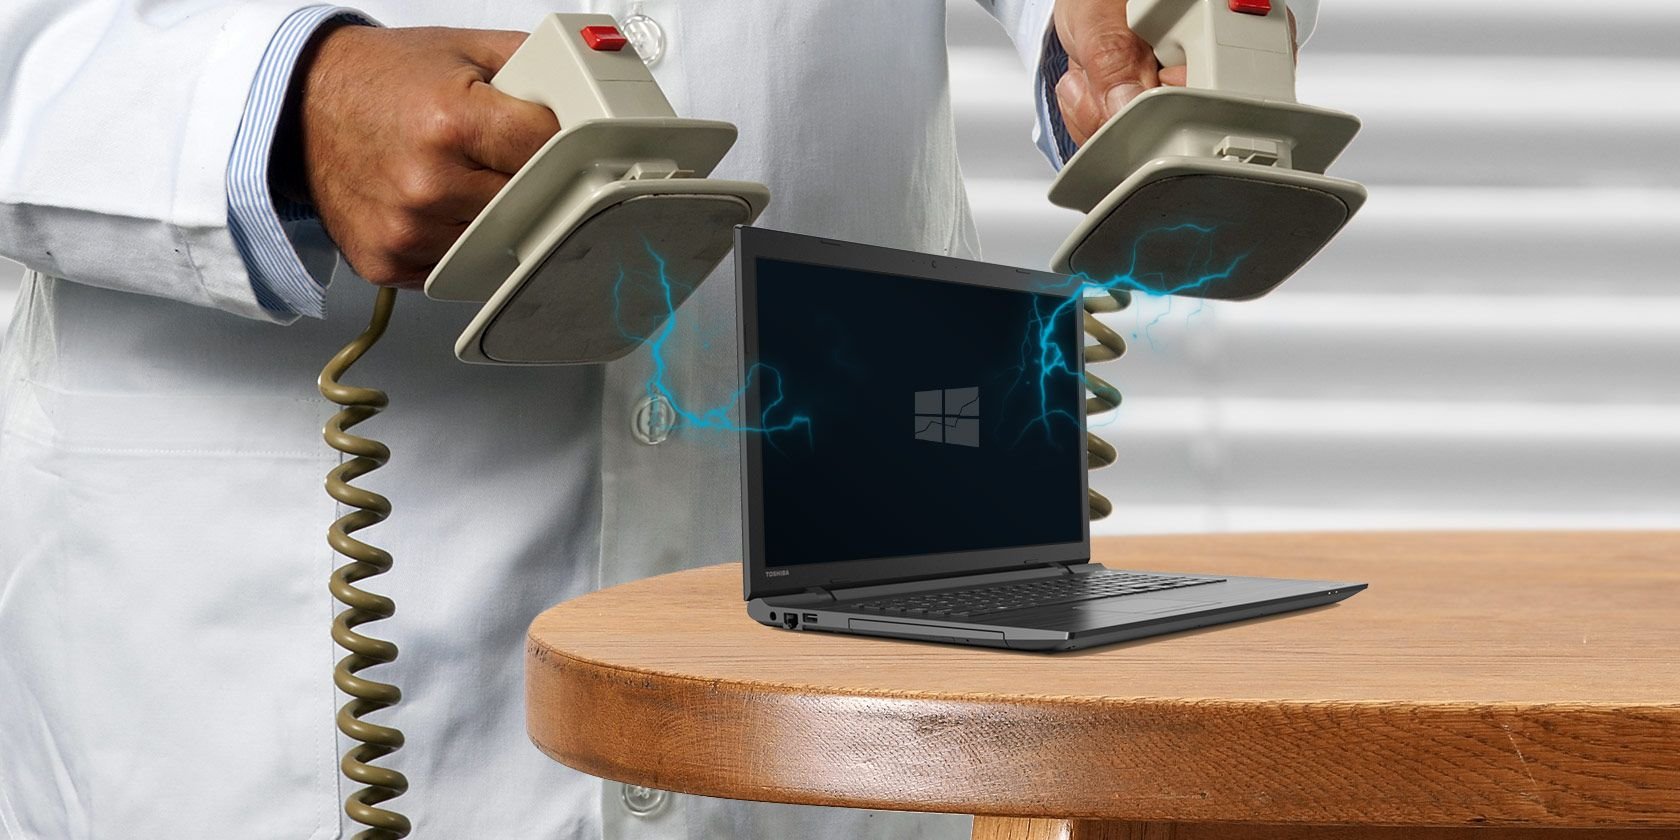 Windows 10 Won't Boot? 12 Fixes to Get Your PC Running Again